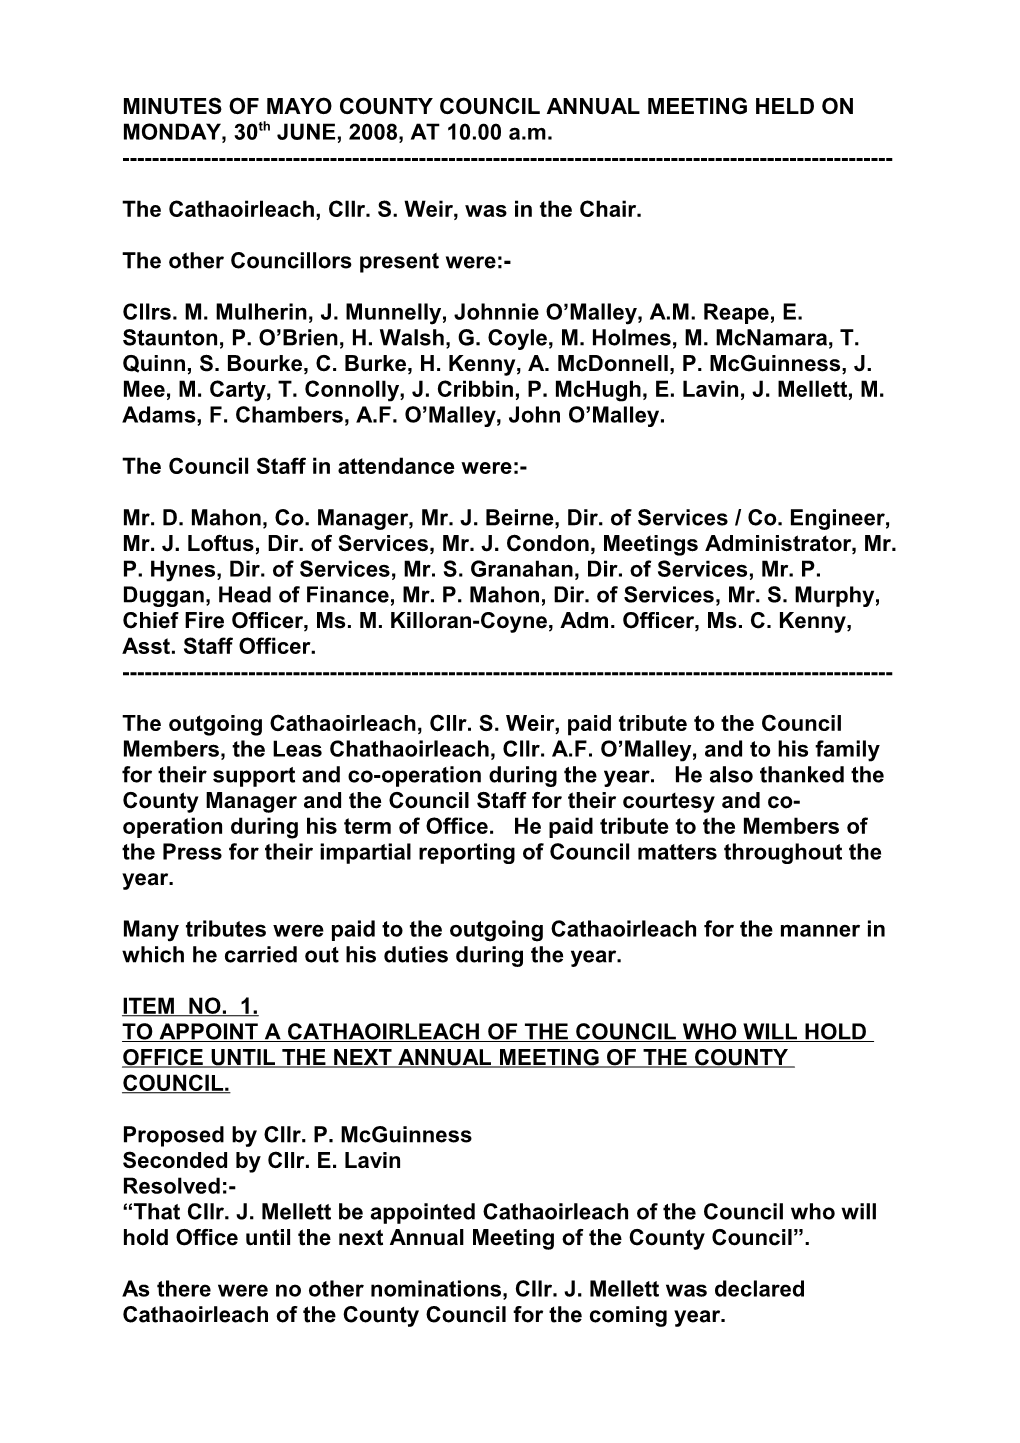 MINUTES of MAYO COUNTY COUNCIL ANNUAL MEETING HELD on MONDAY, 30Th JUNE, 2008, at 10